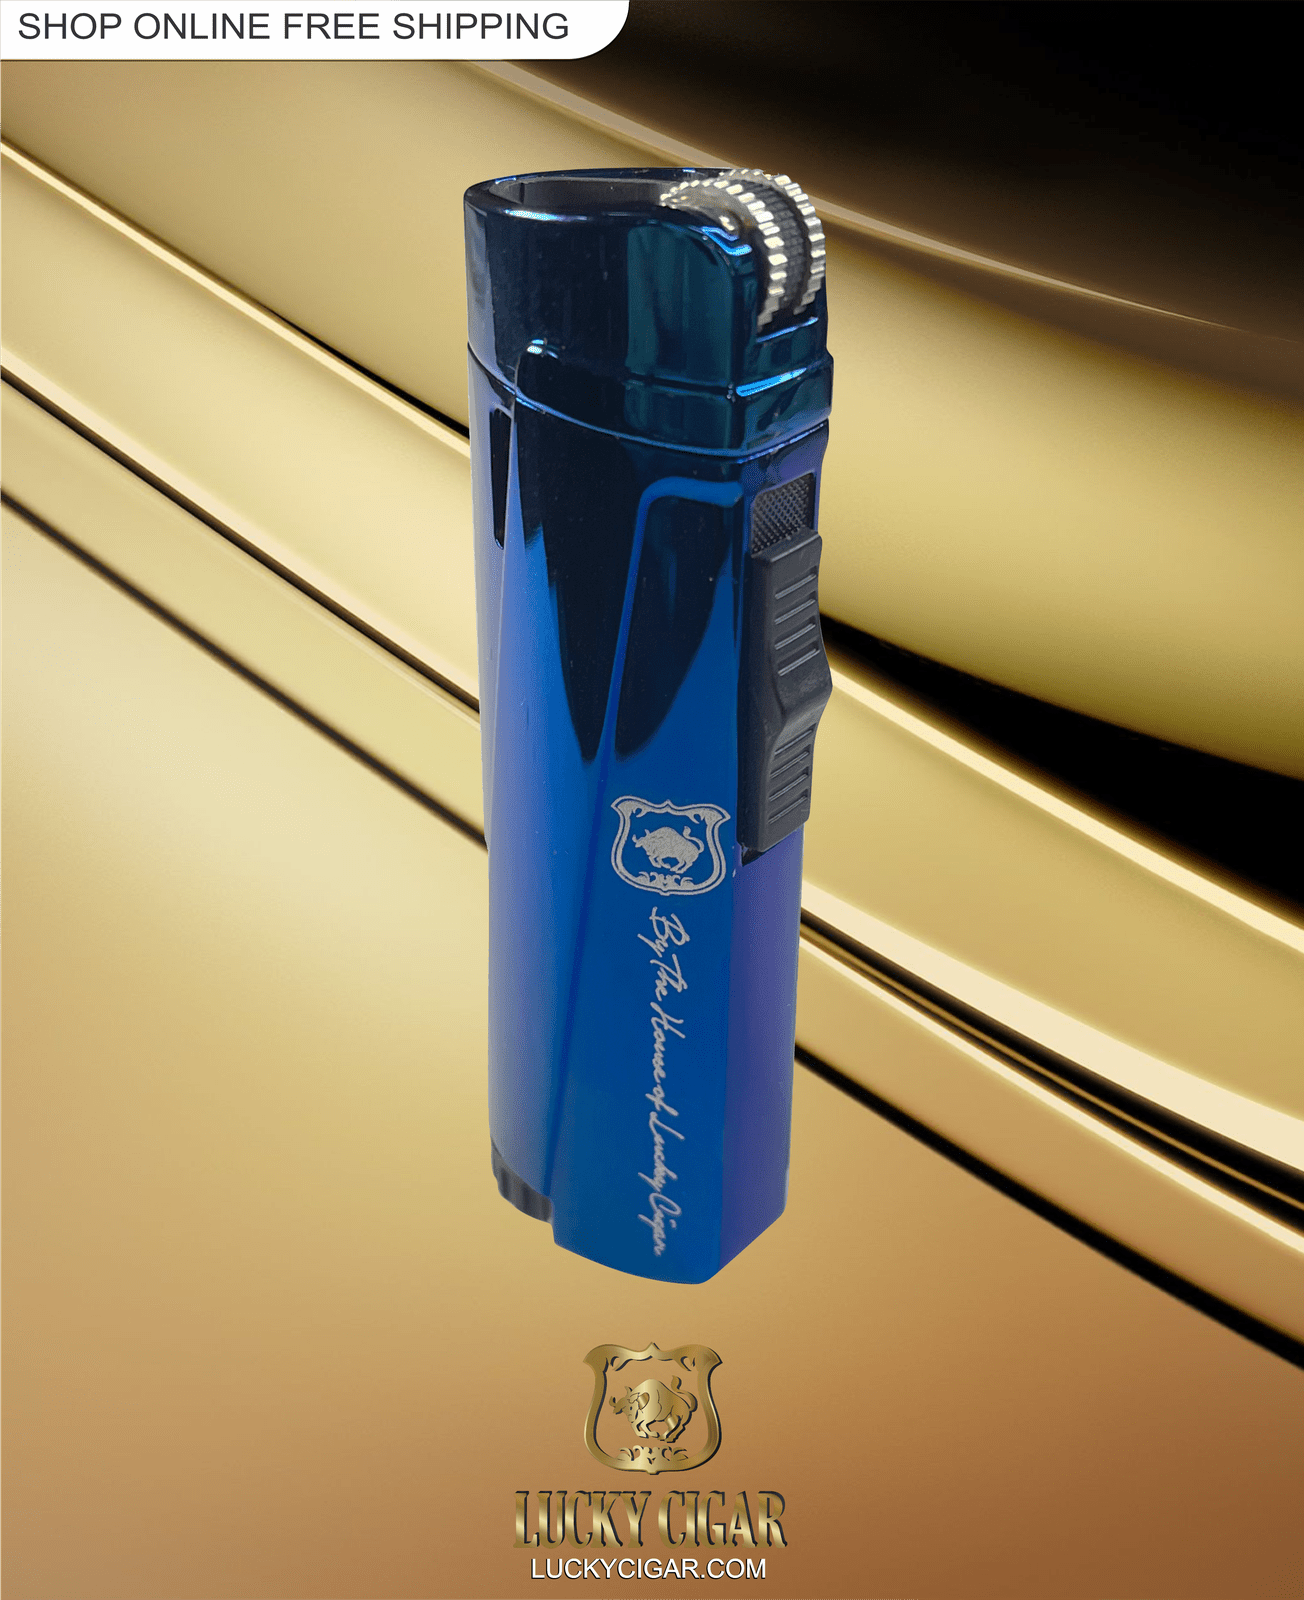 Cigar Lifestyle Accessories: Torch Lighter in Blue Metal FInish